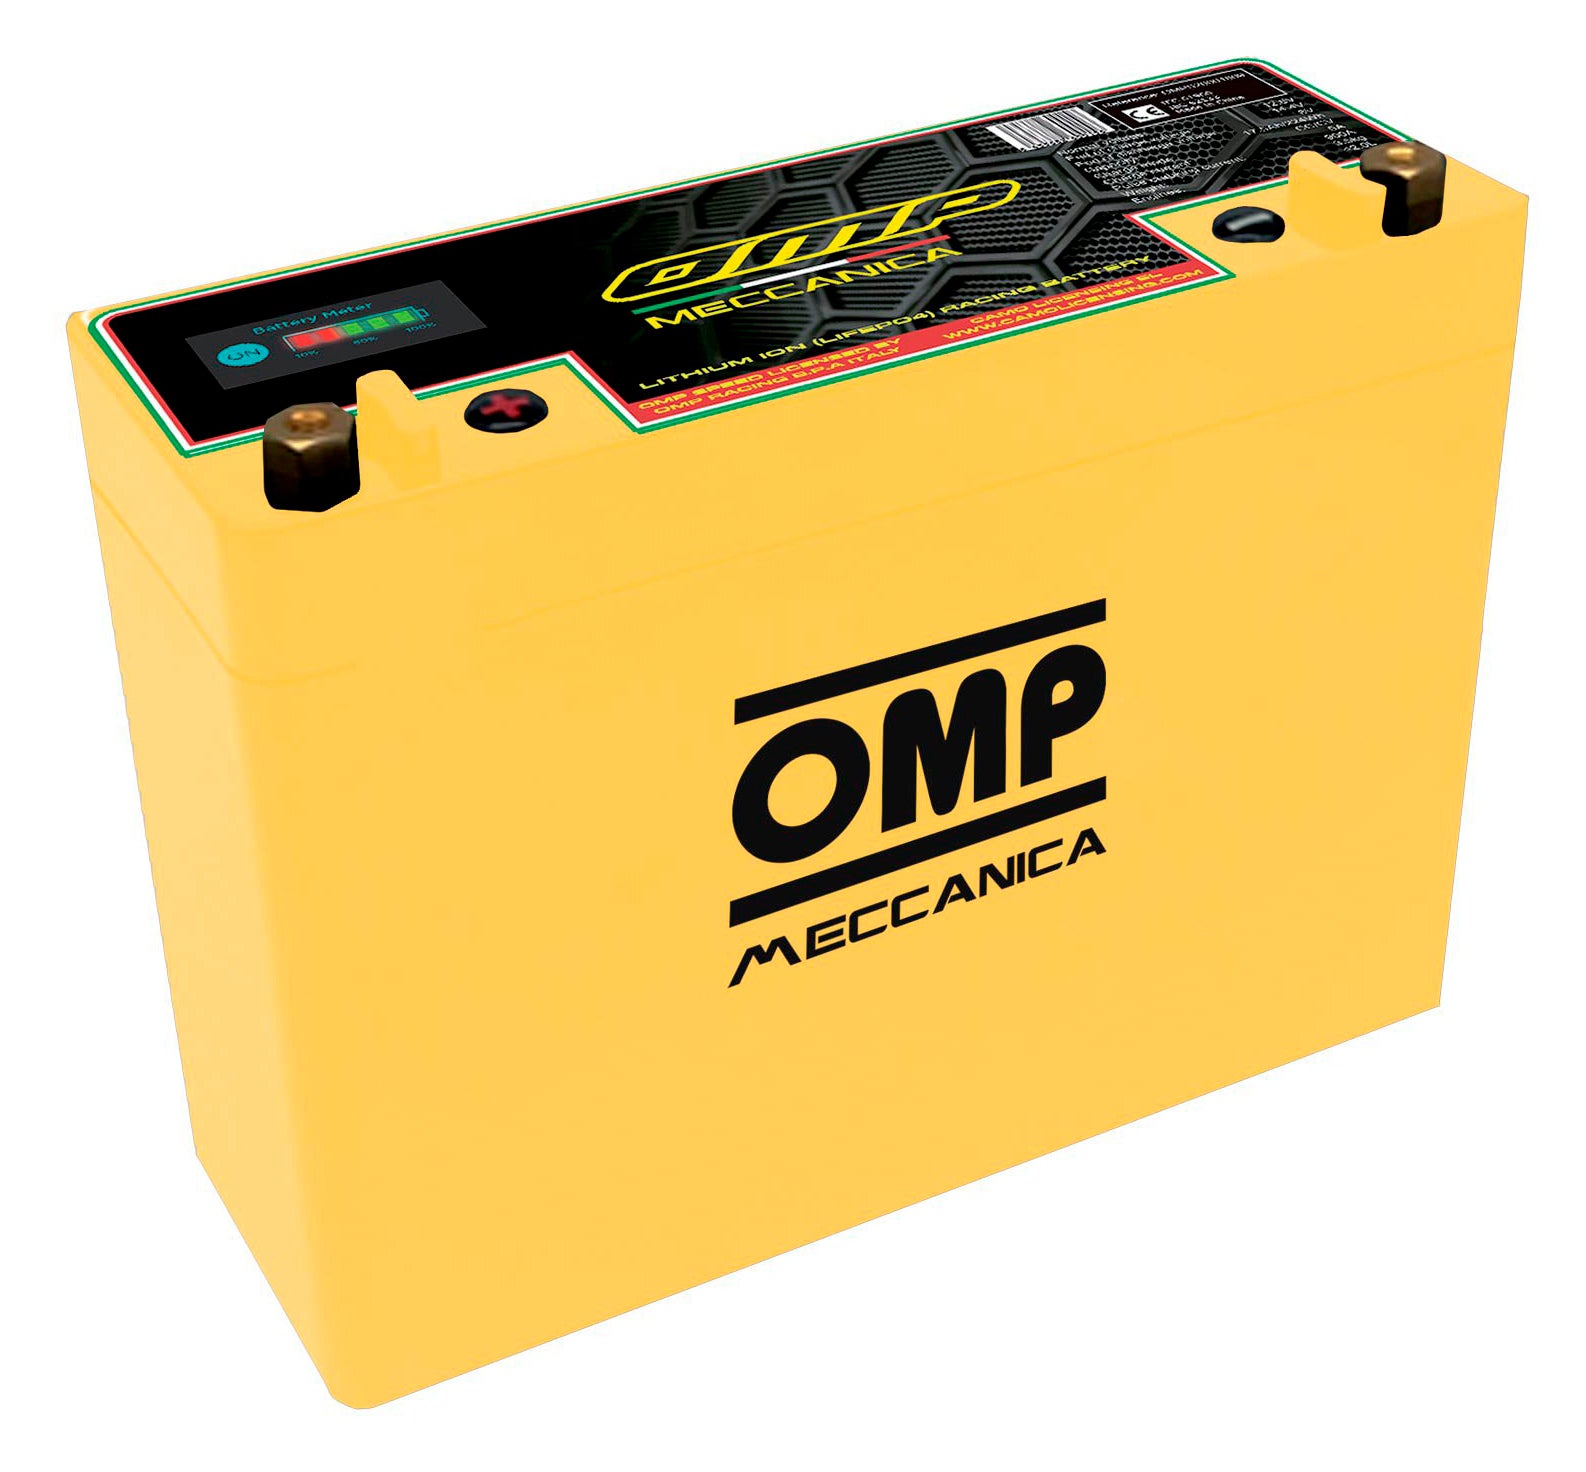 OMP OMPS20002009 Lithium Battery for cars with Alternator, 20AH/256WH, PCC 1000A, Weight 3.8KG Photo-0 